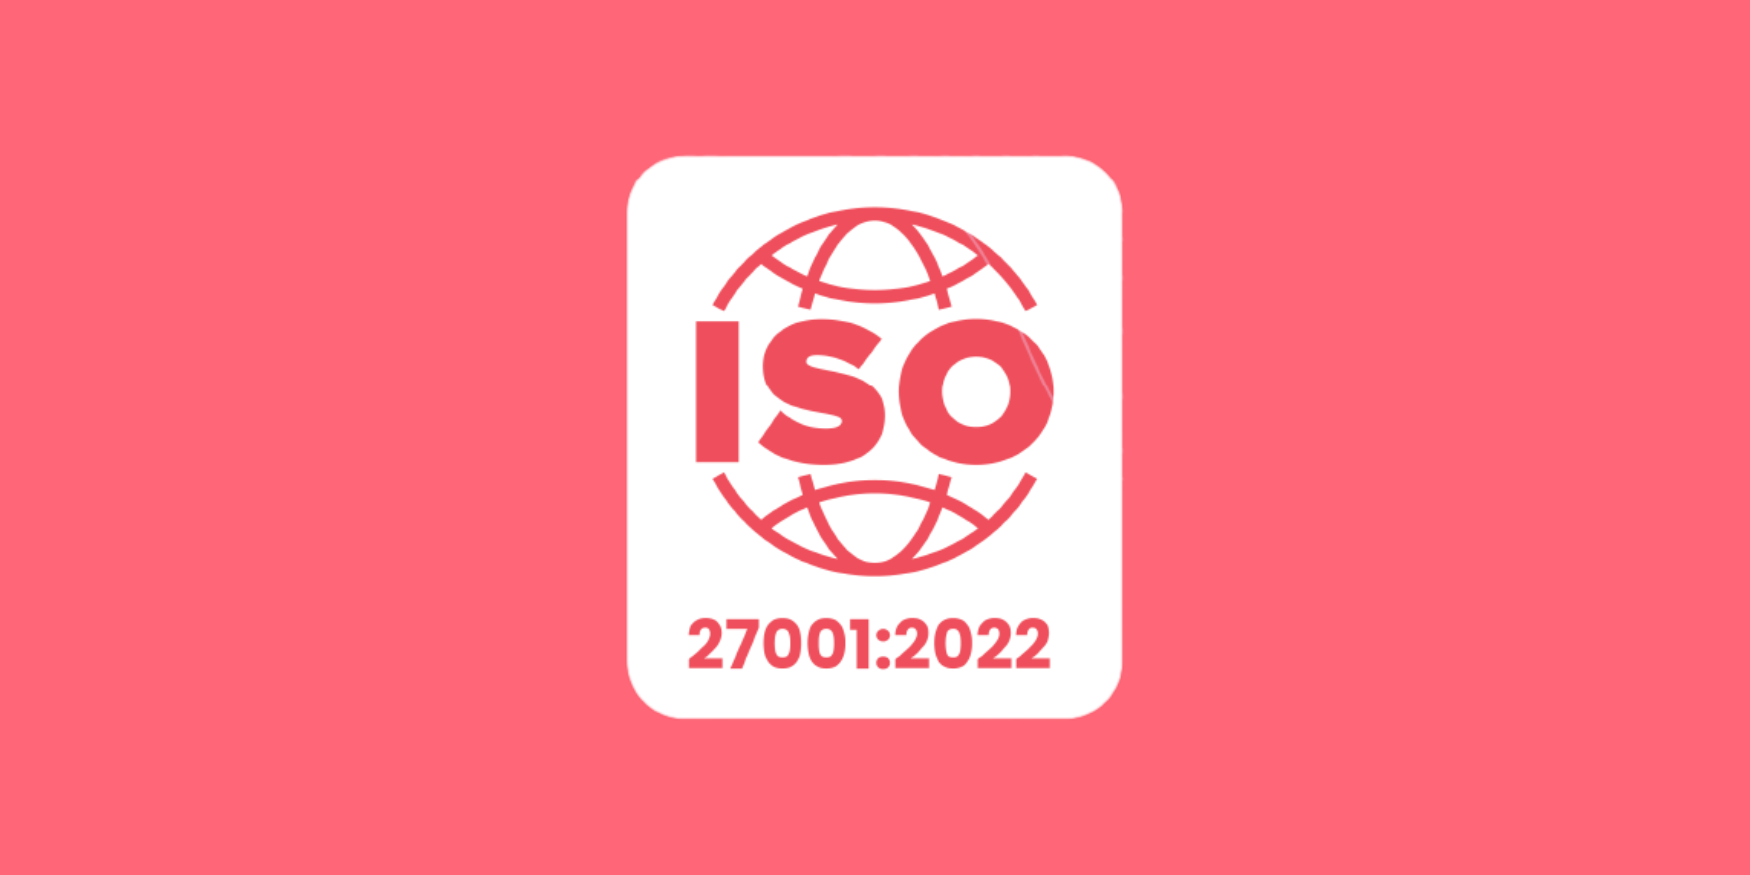 Featured Image: aanmelder.nl achieves the ISO certificate 27001:2022